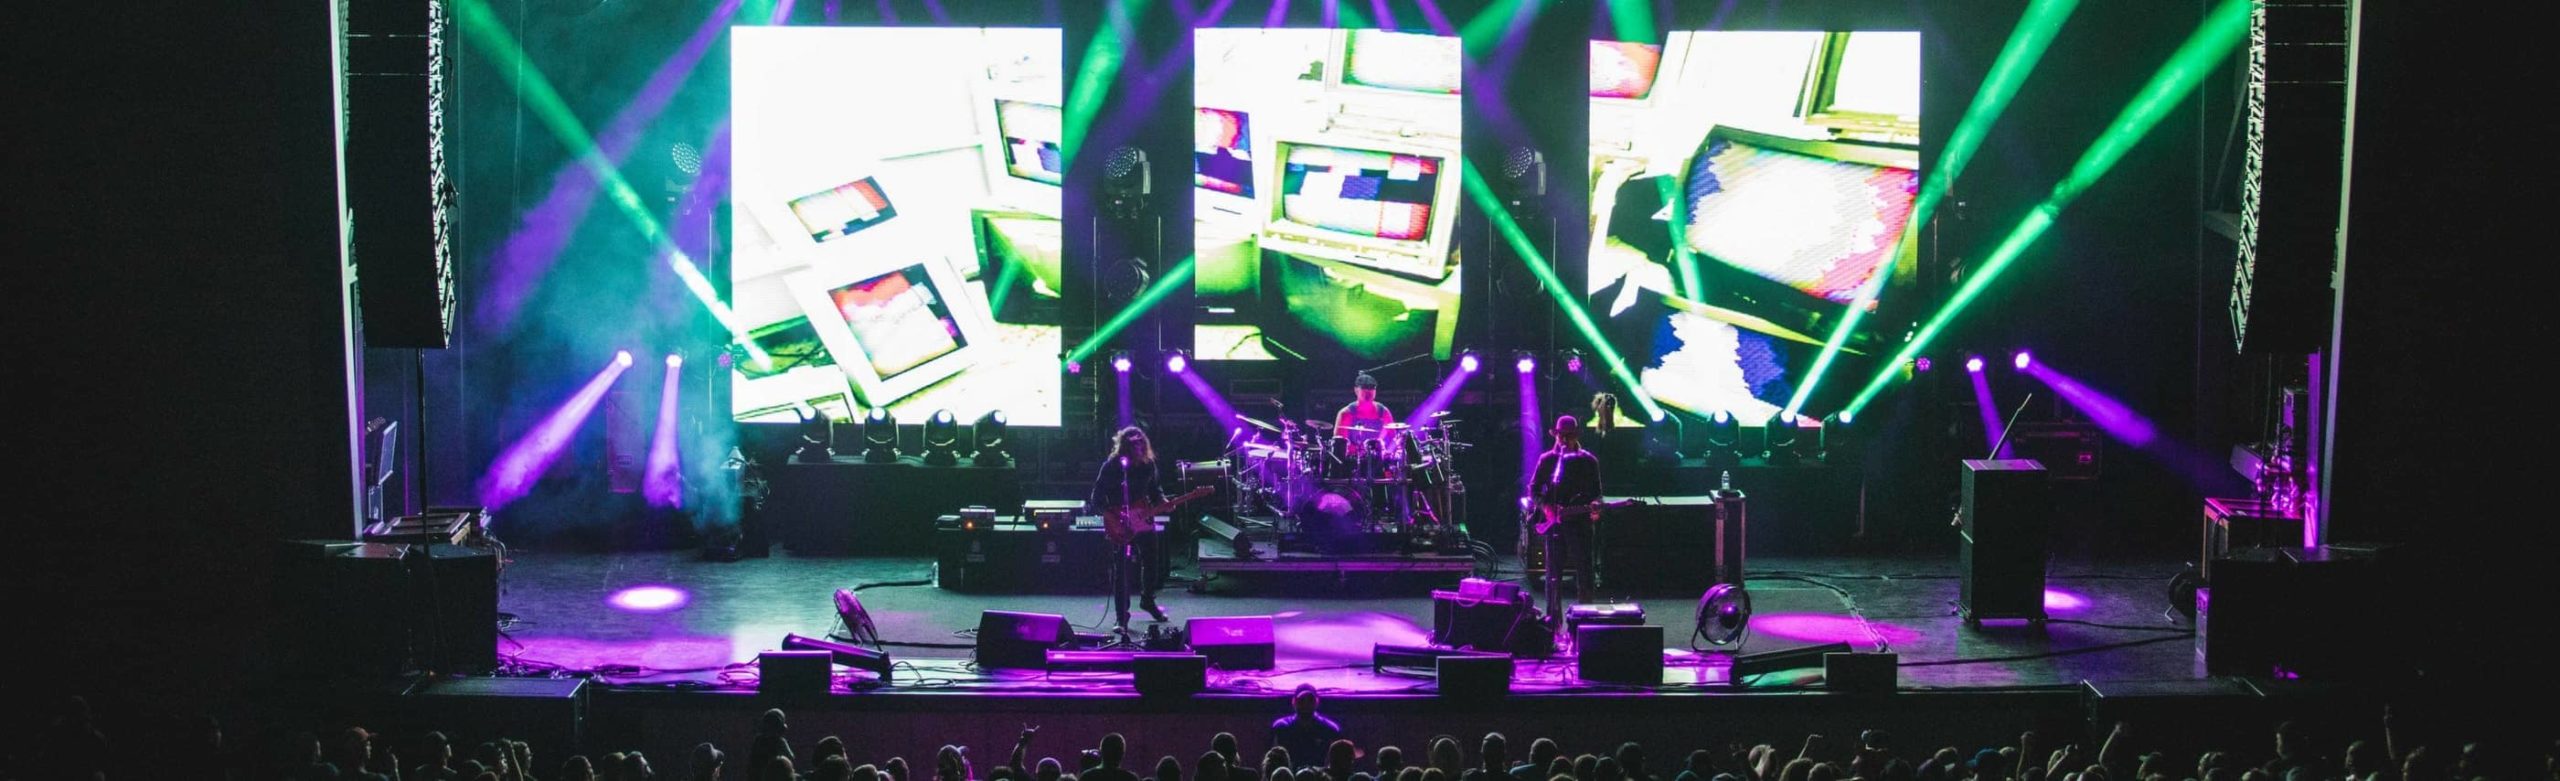 Primus Will Pay Tribute to Rush When They Return to KettleHouse Amphitheater Image